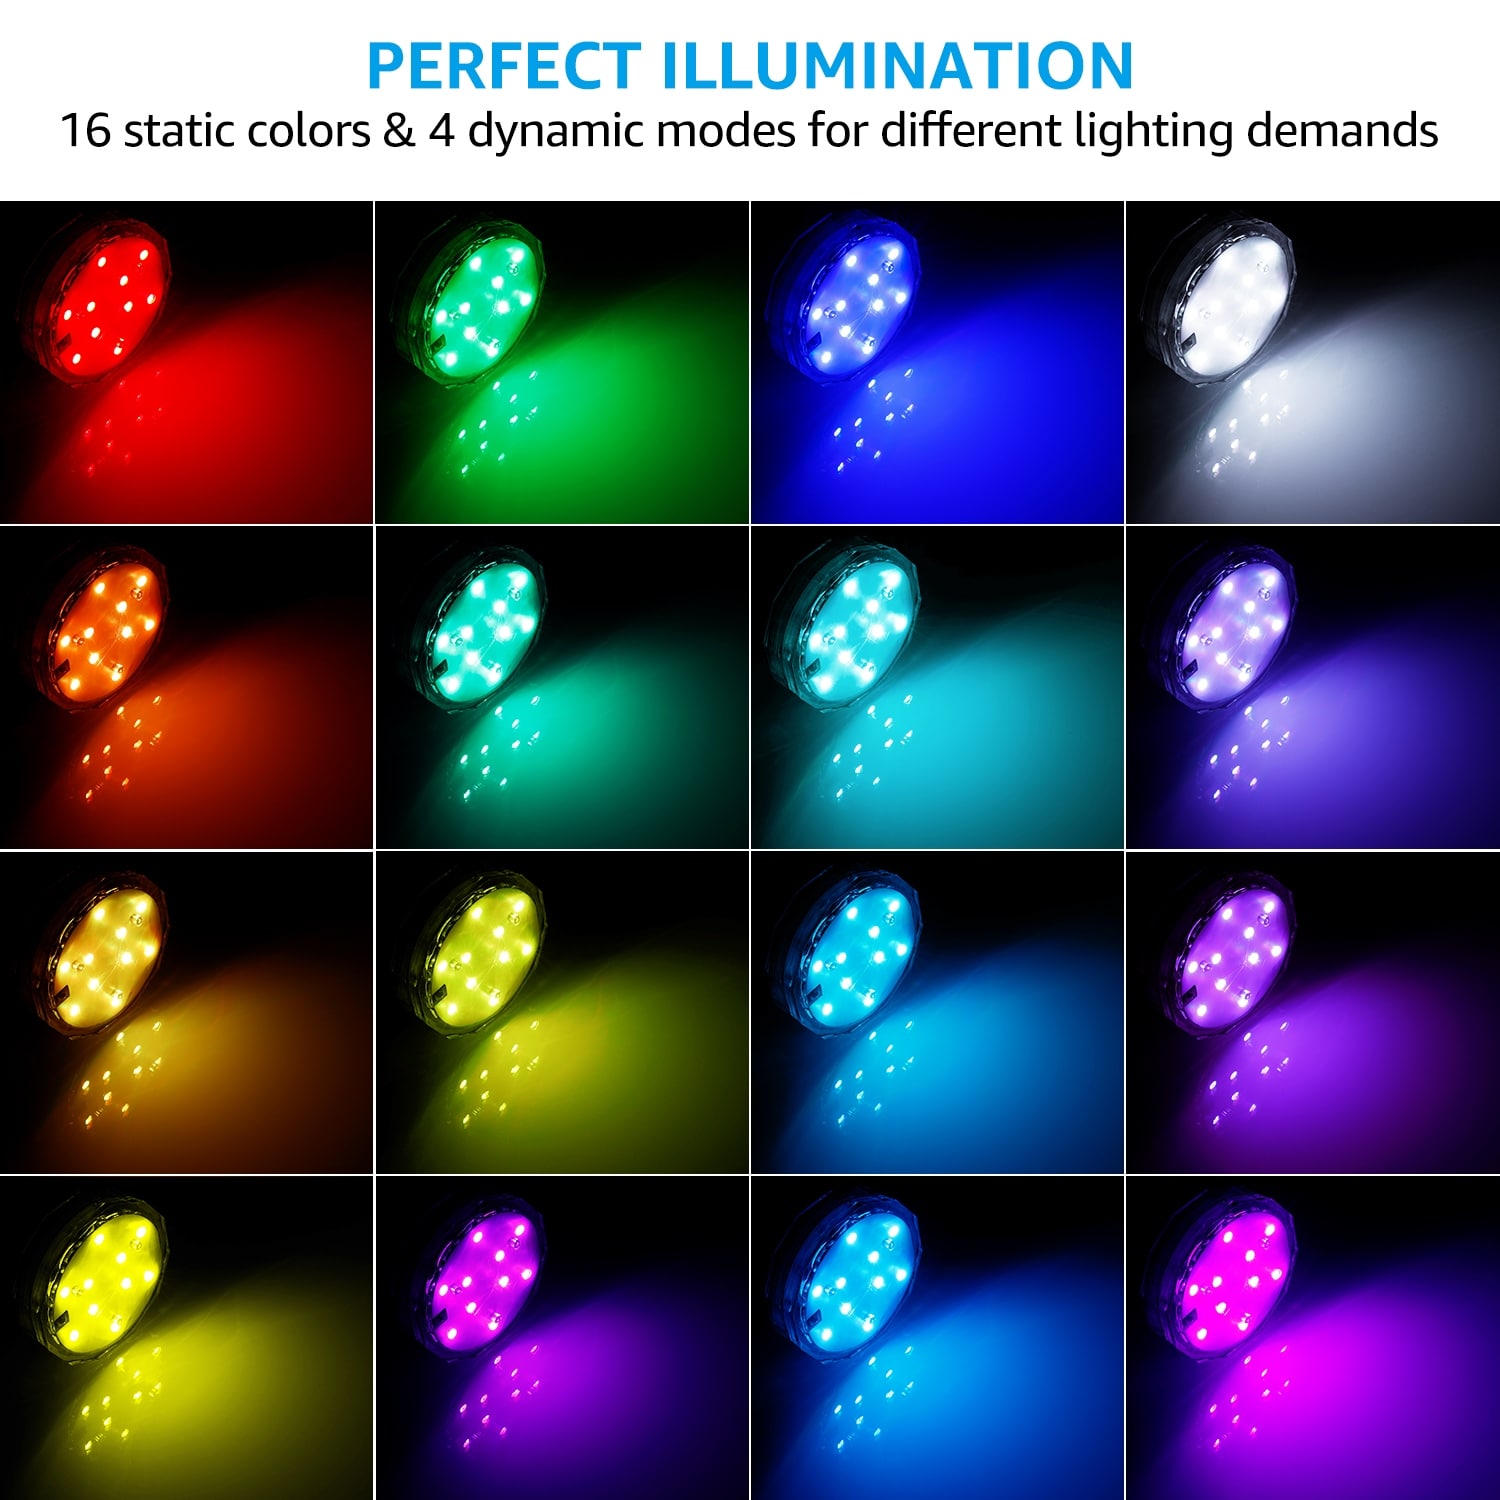 Submersible Led Lights Remote 2019 Underwater Waterproof Pad Battery Operated 